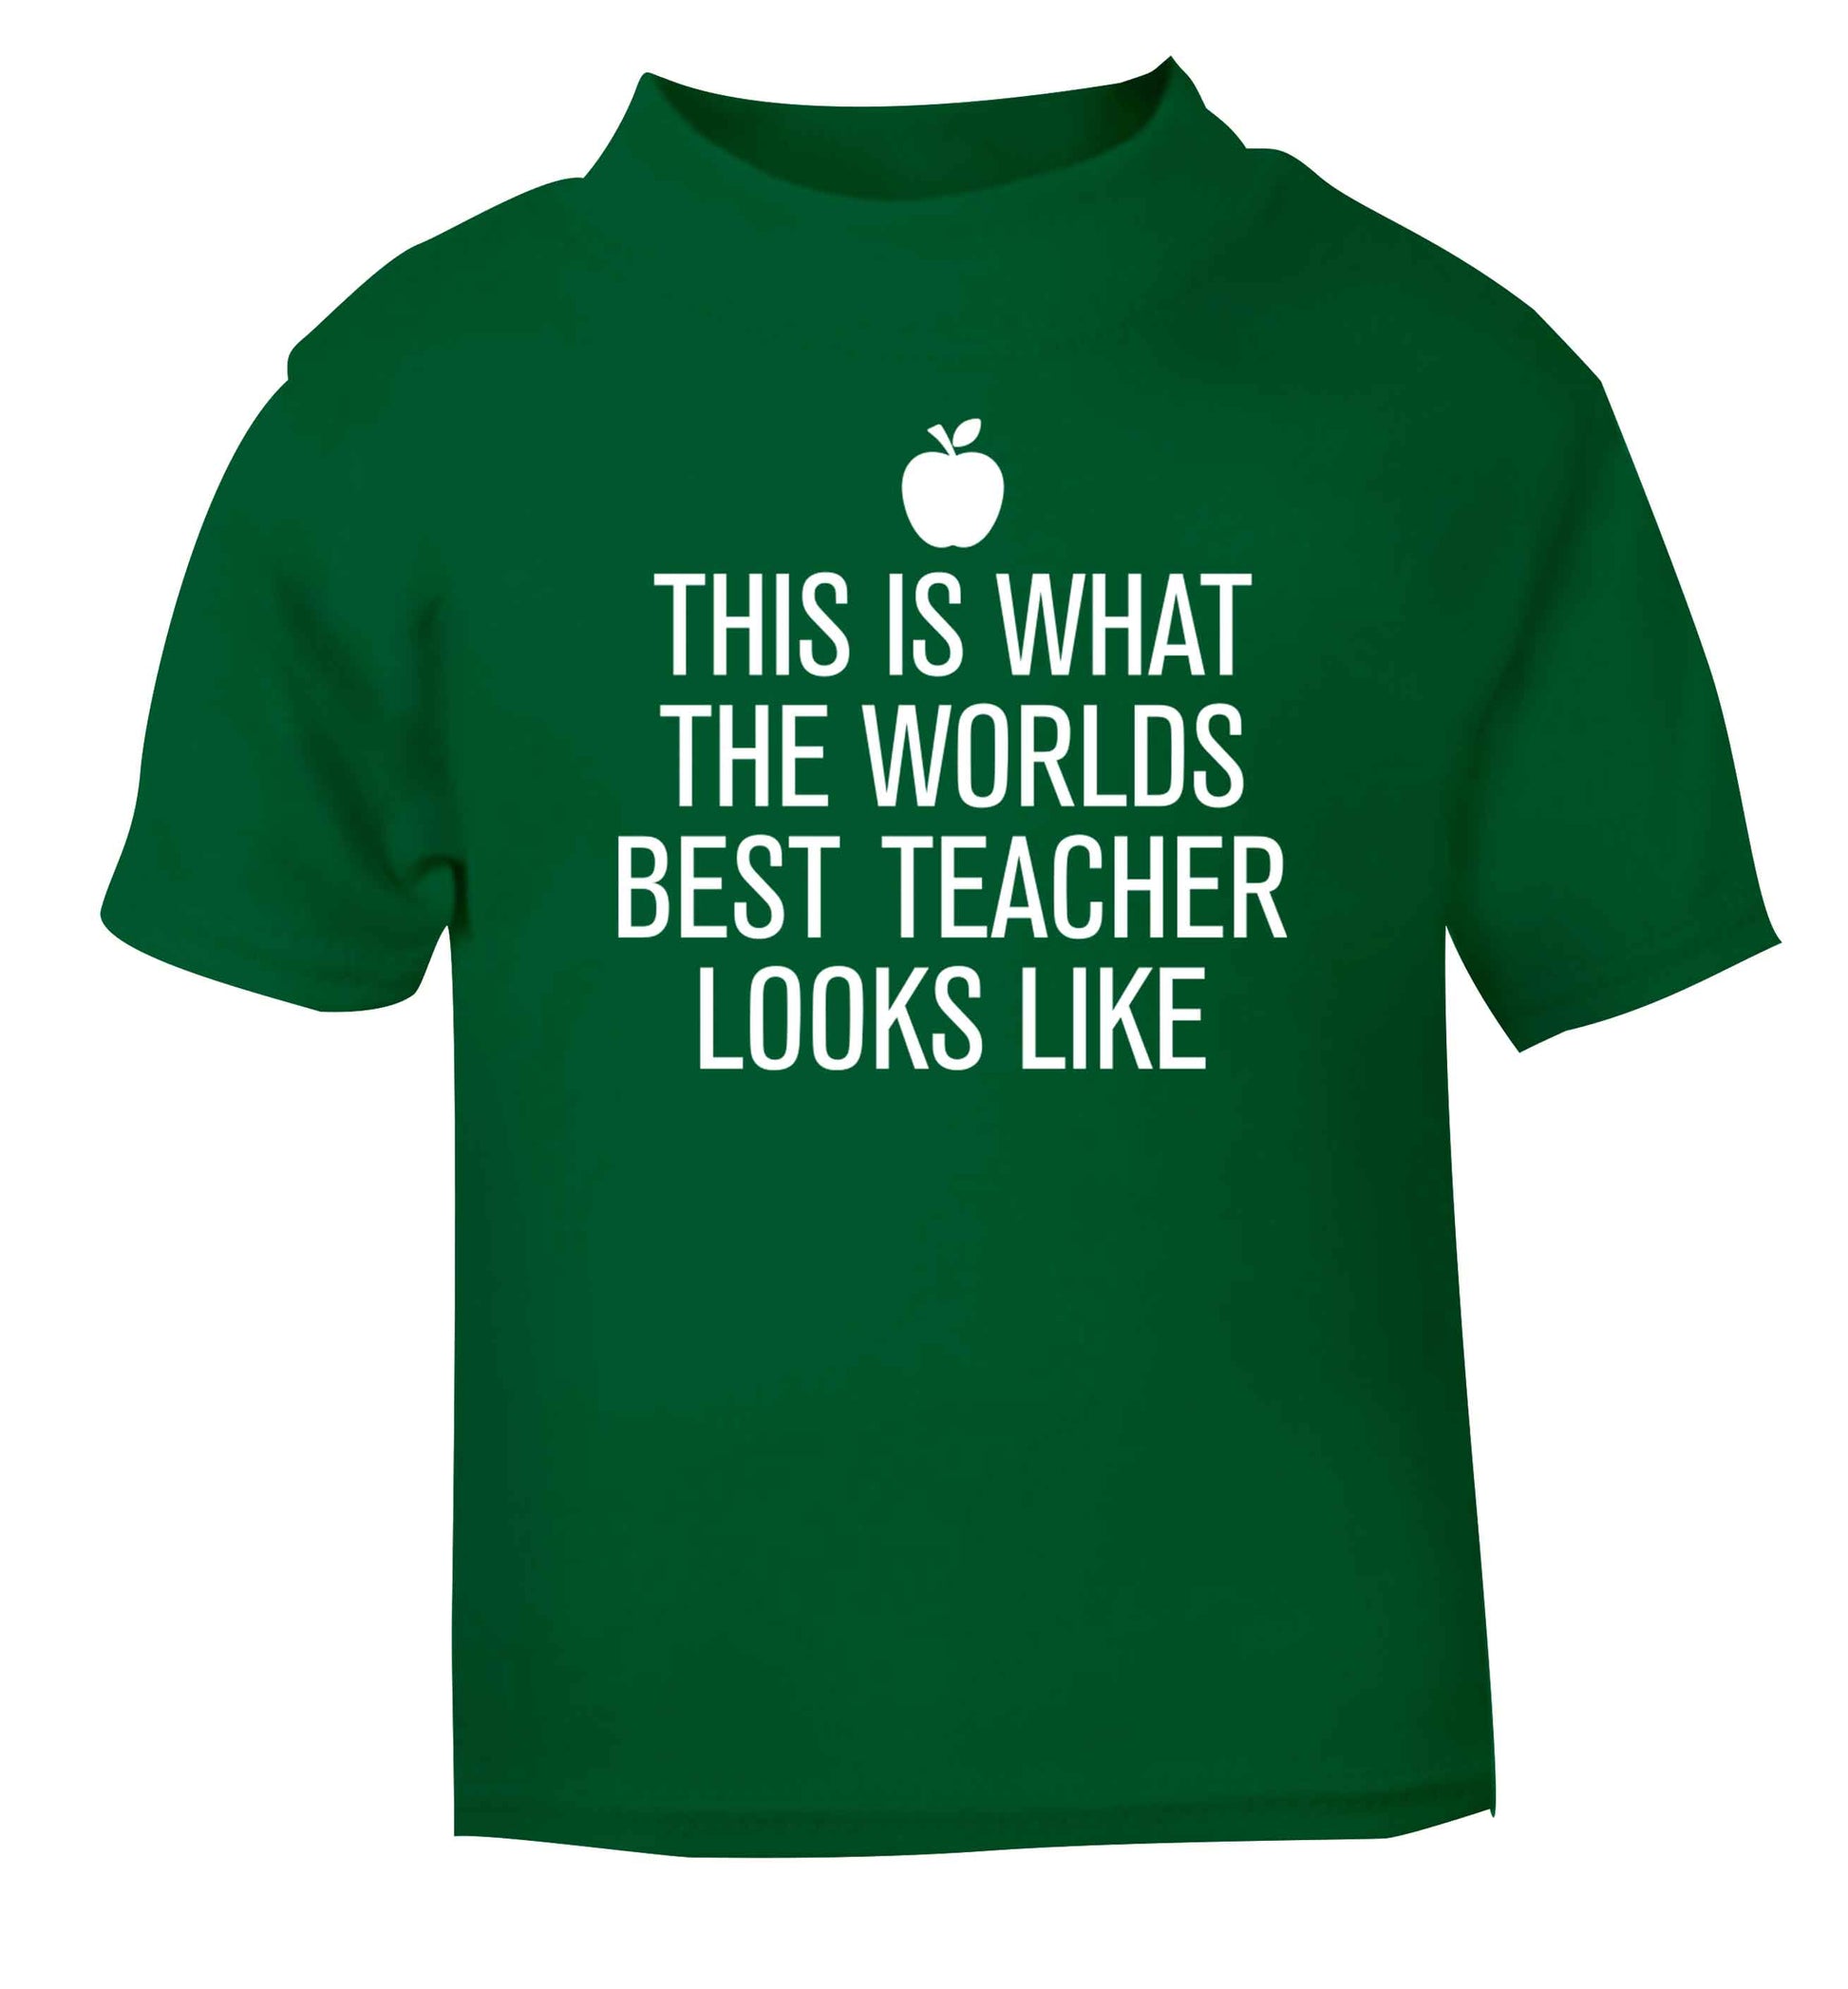 This is what the worlds best teacher looks like green baby toddler Tshirt 2 Years